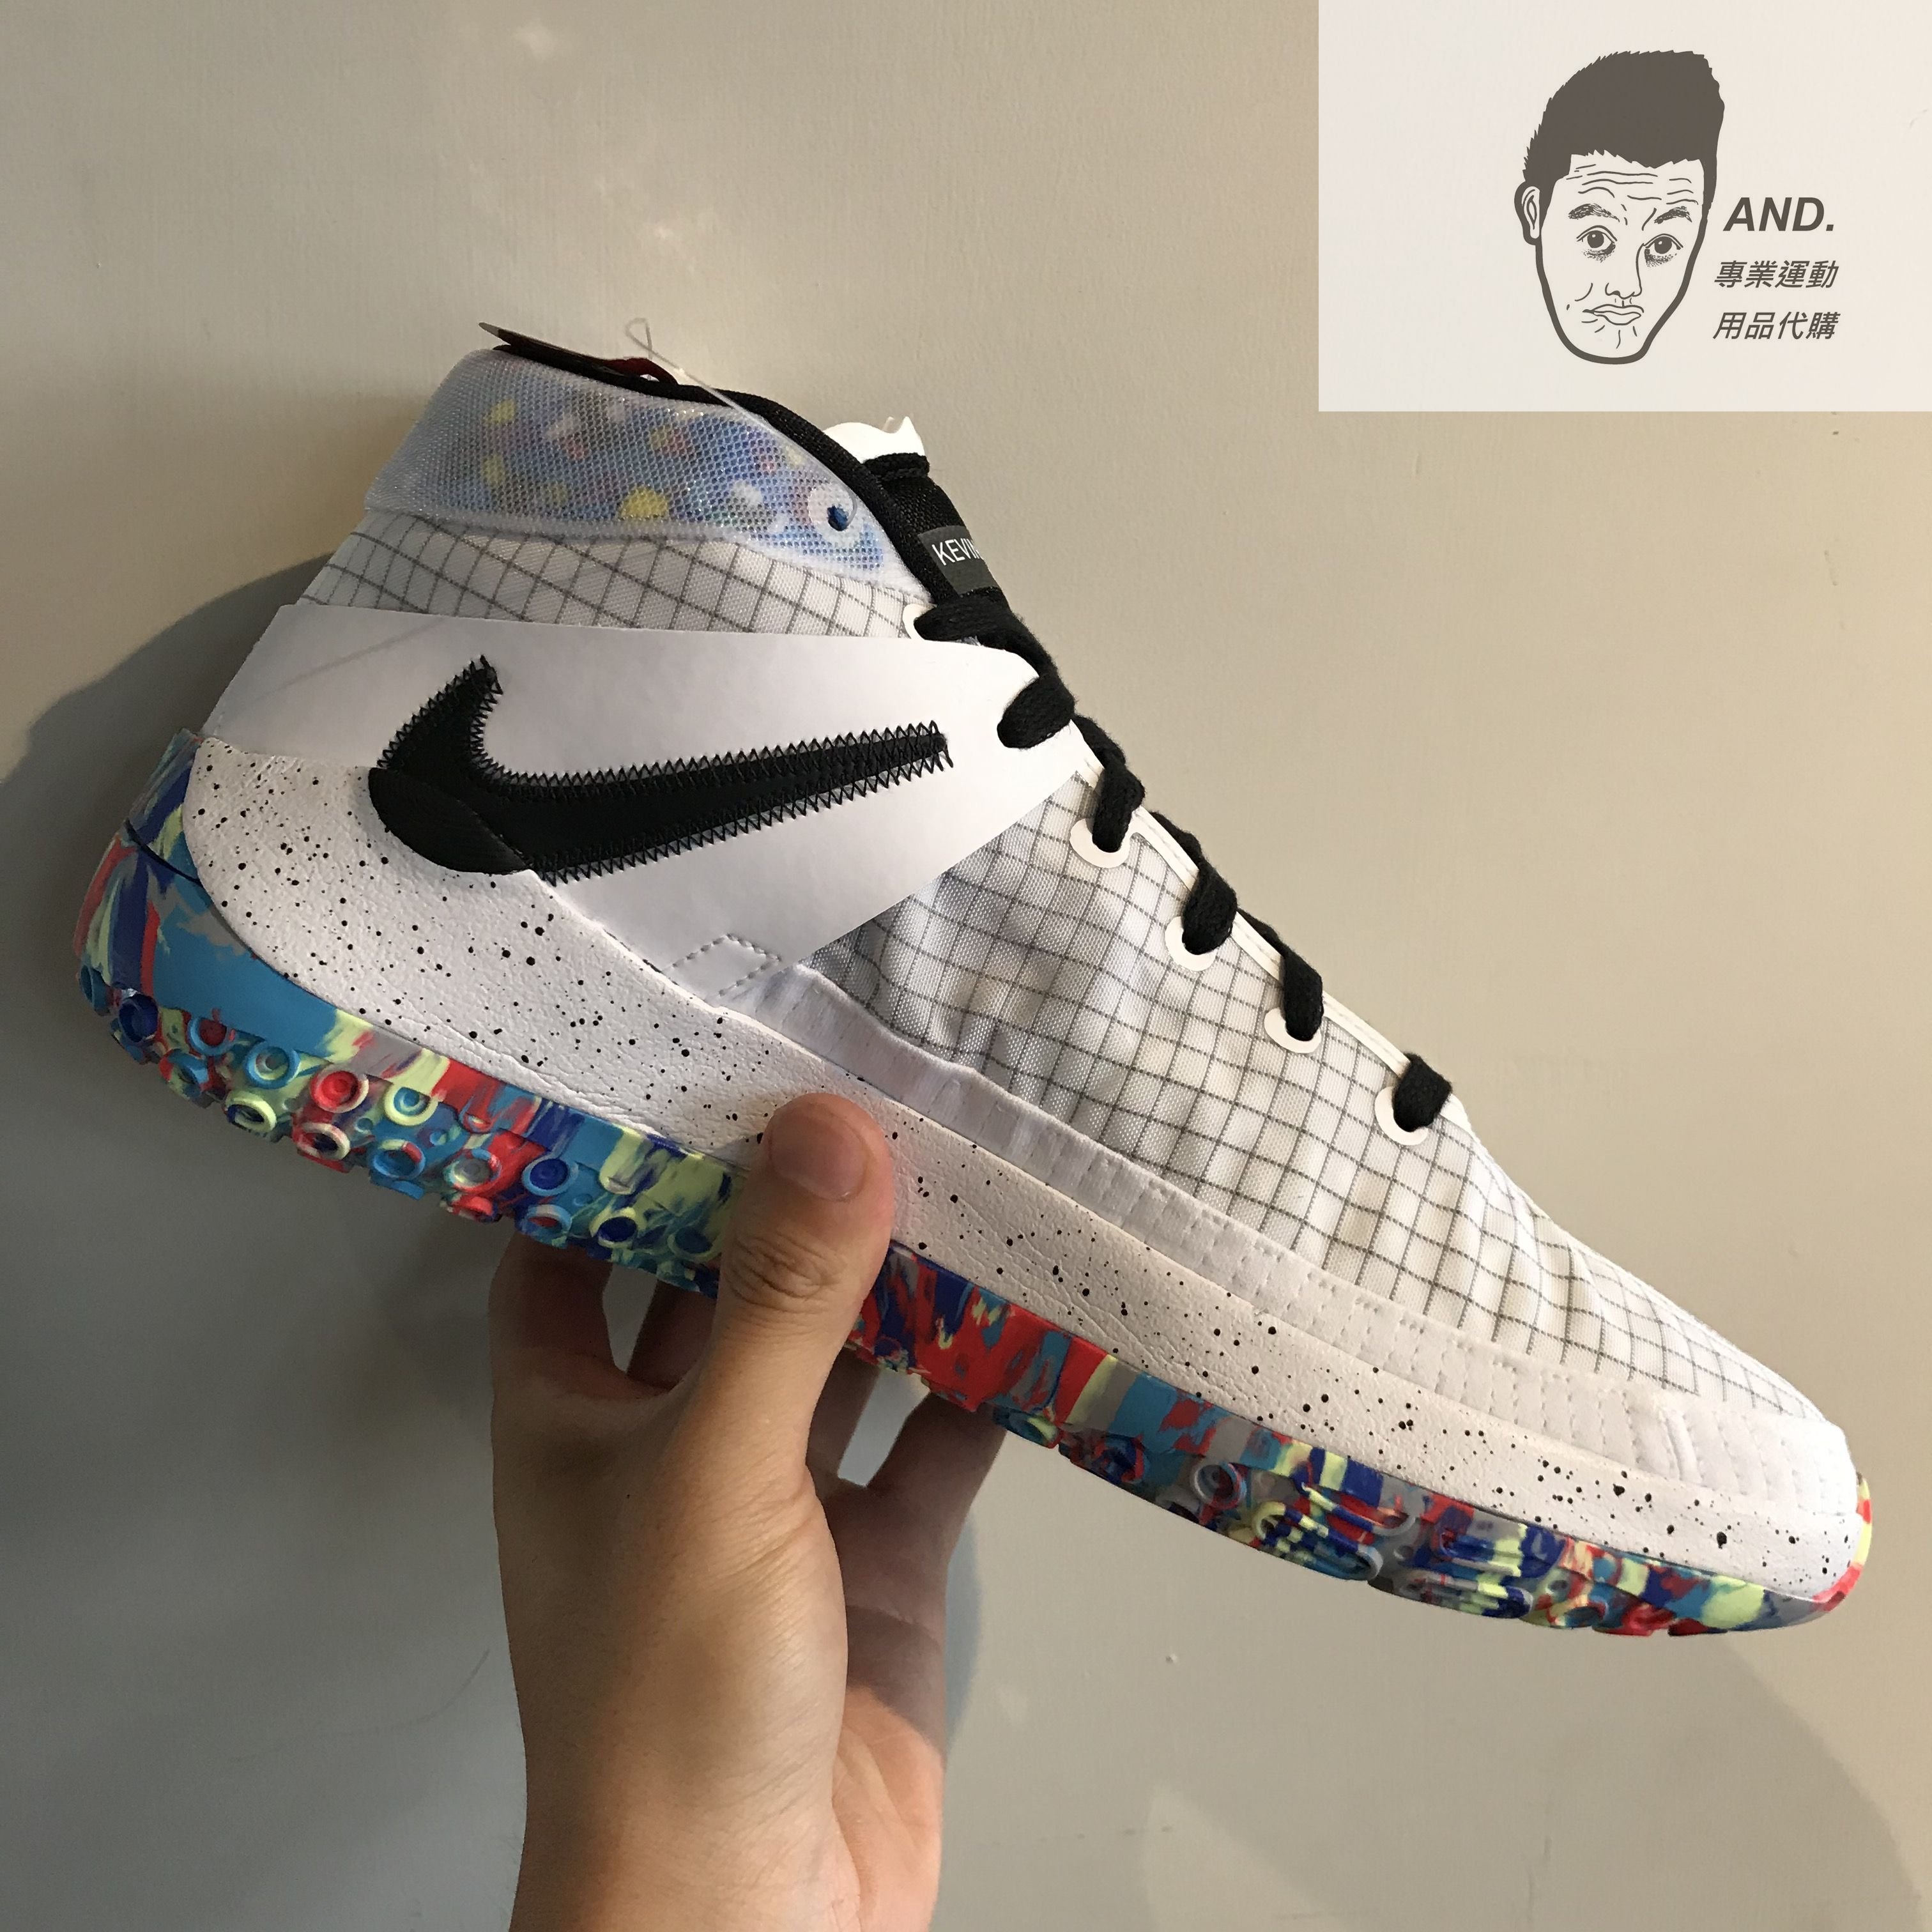 AND.】NIKE ZOOM KD 13 EP HOME TEAM 白彩耐磨杜蘭特XDR CI9949-900